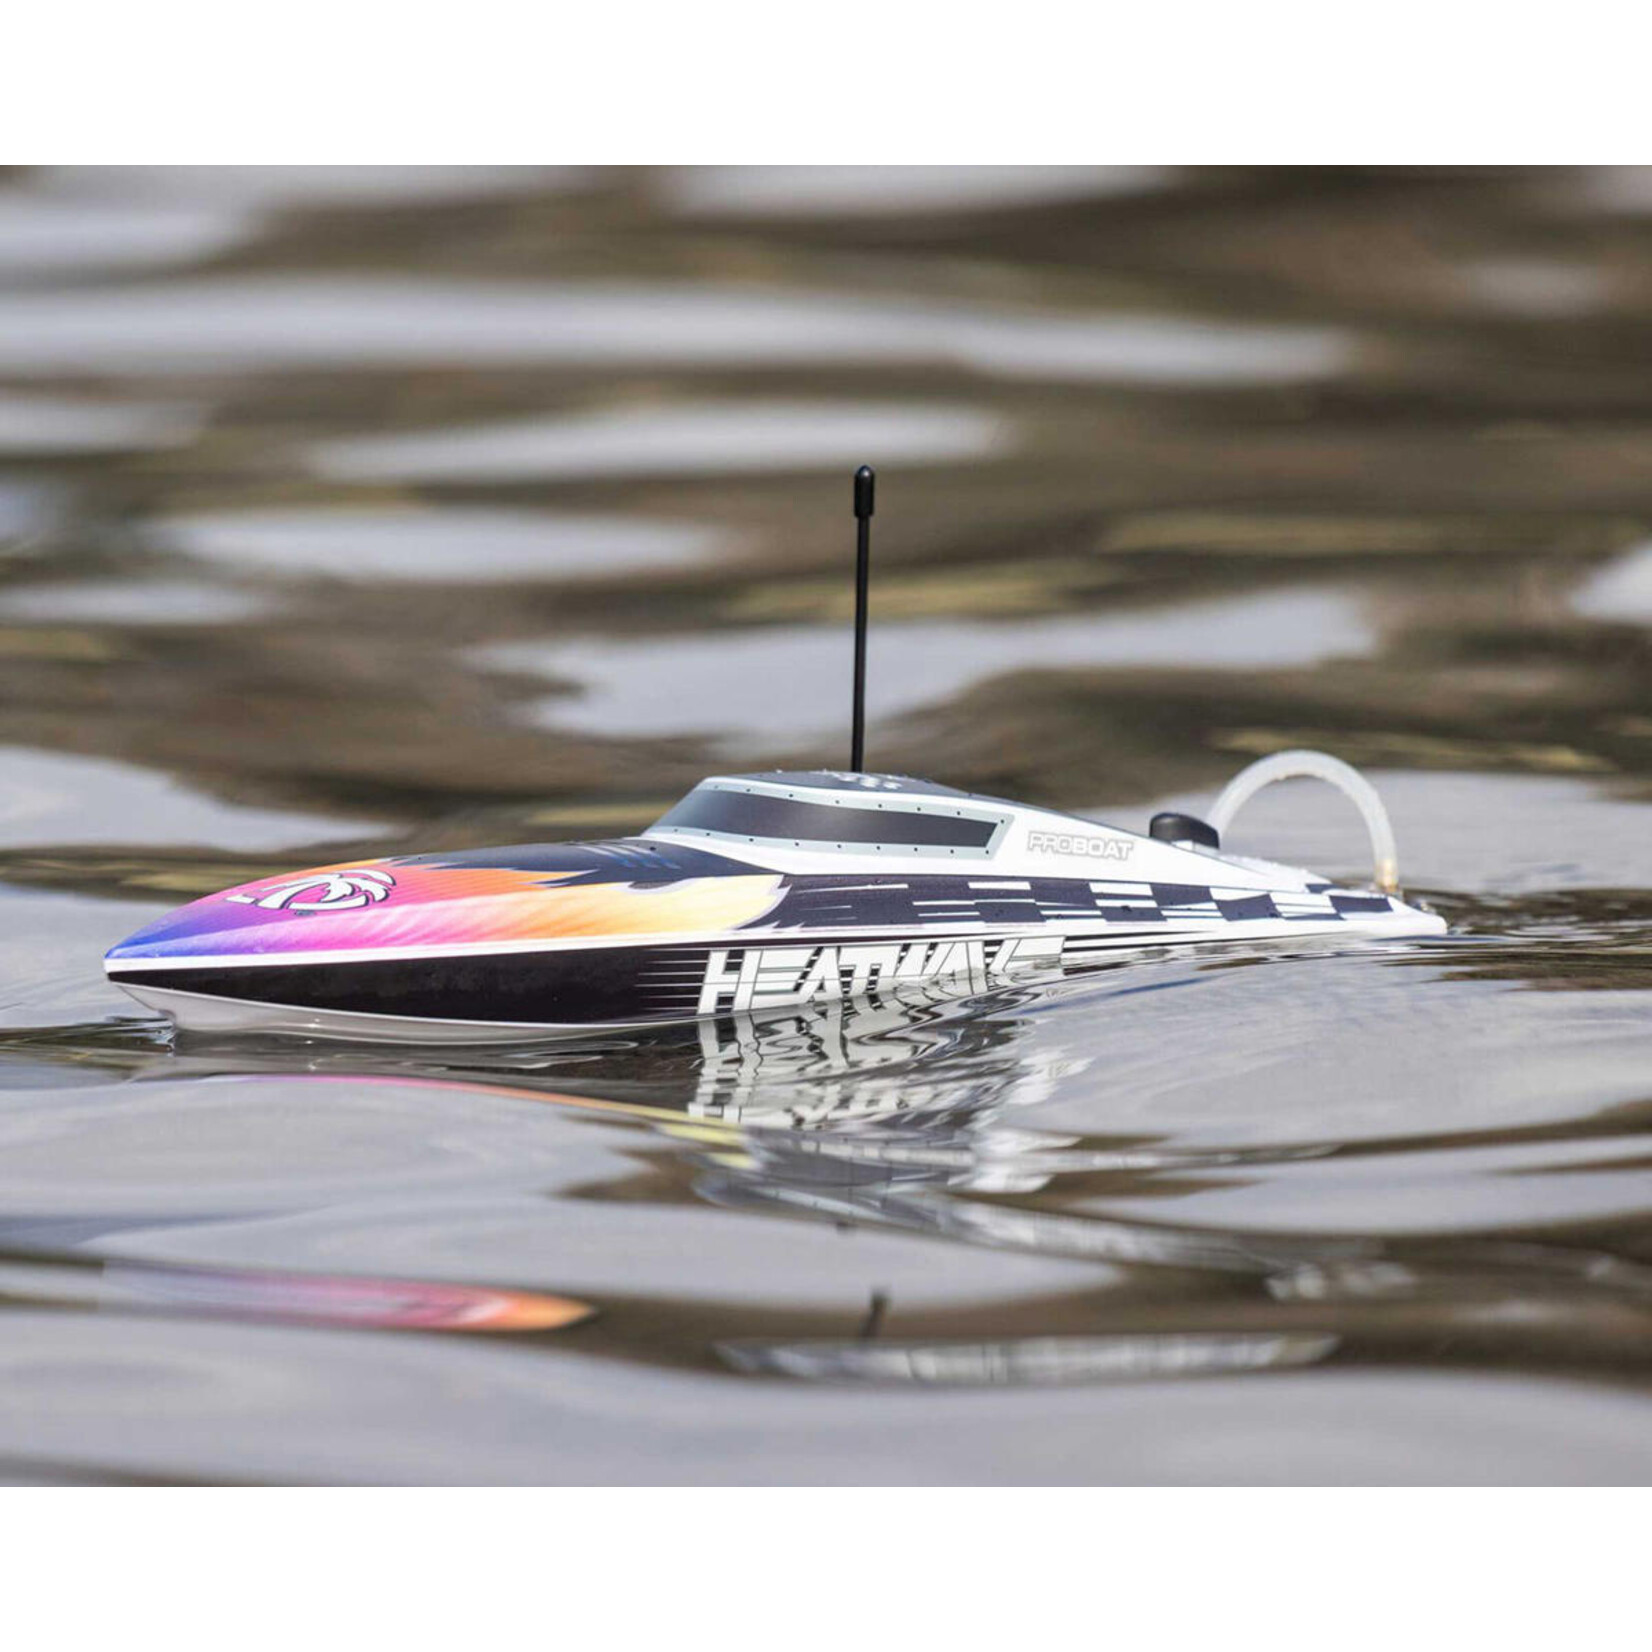 Pro Boat Pro Boat Recoil 2 18" Brushless Deep-V Self-Righting RTR Boat (Heatwave) w/2.4GHz Radio #PRB08053T2